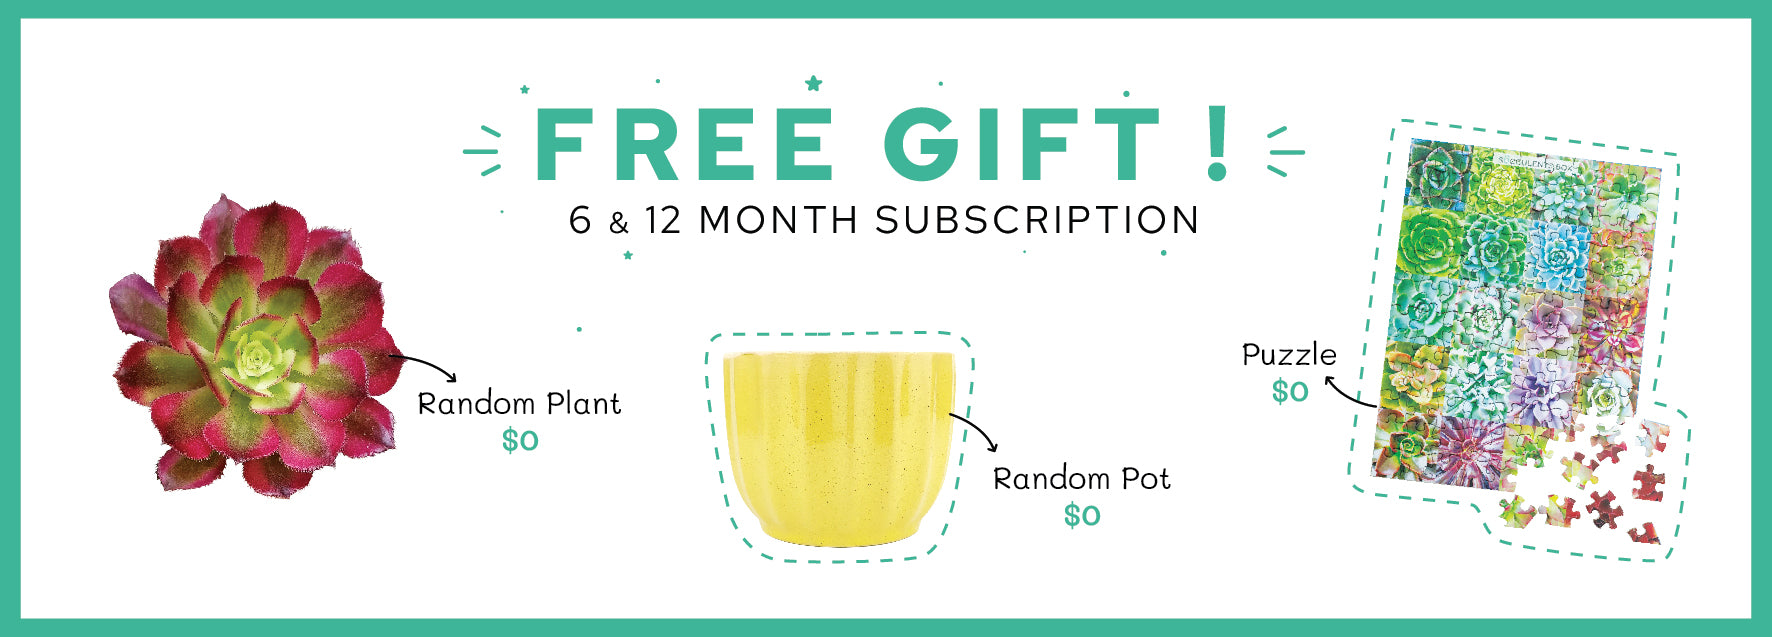 Succulents Box offer free special gift for 6 and 12 month subscription orders